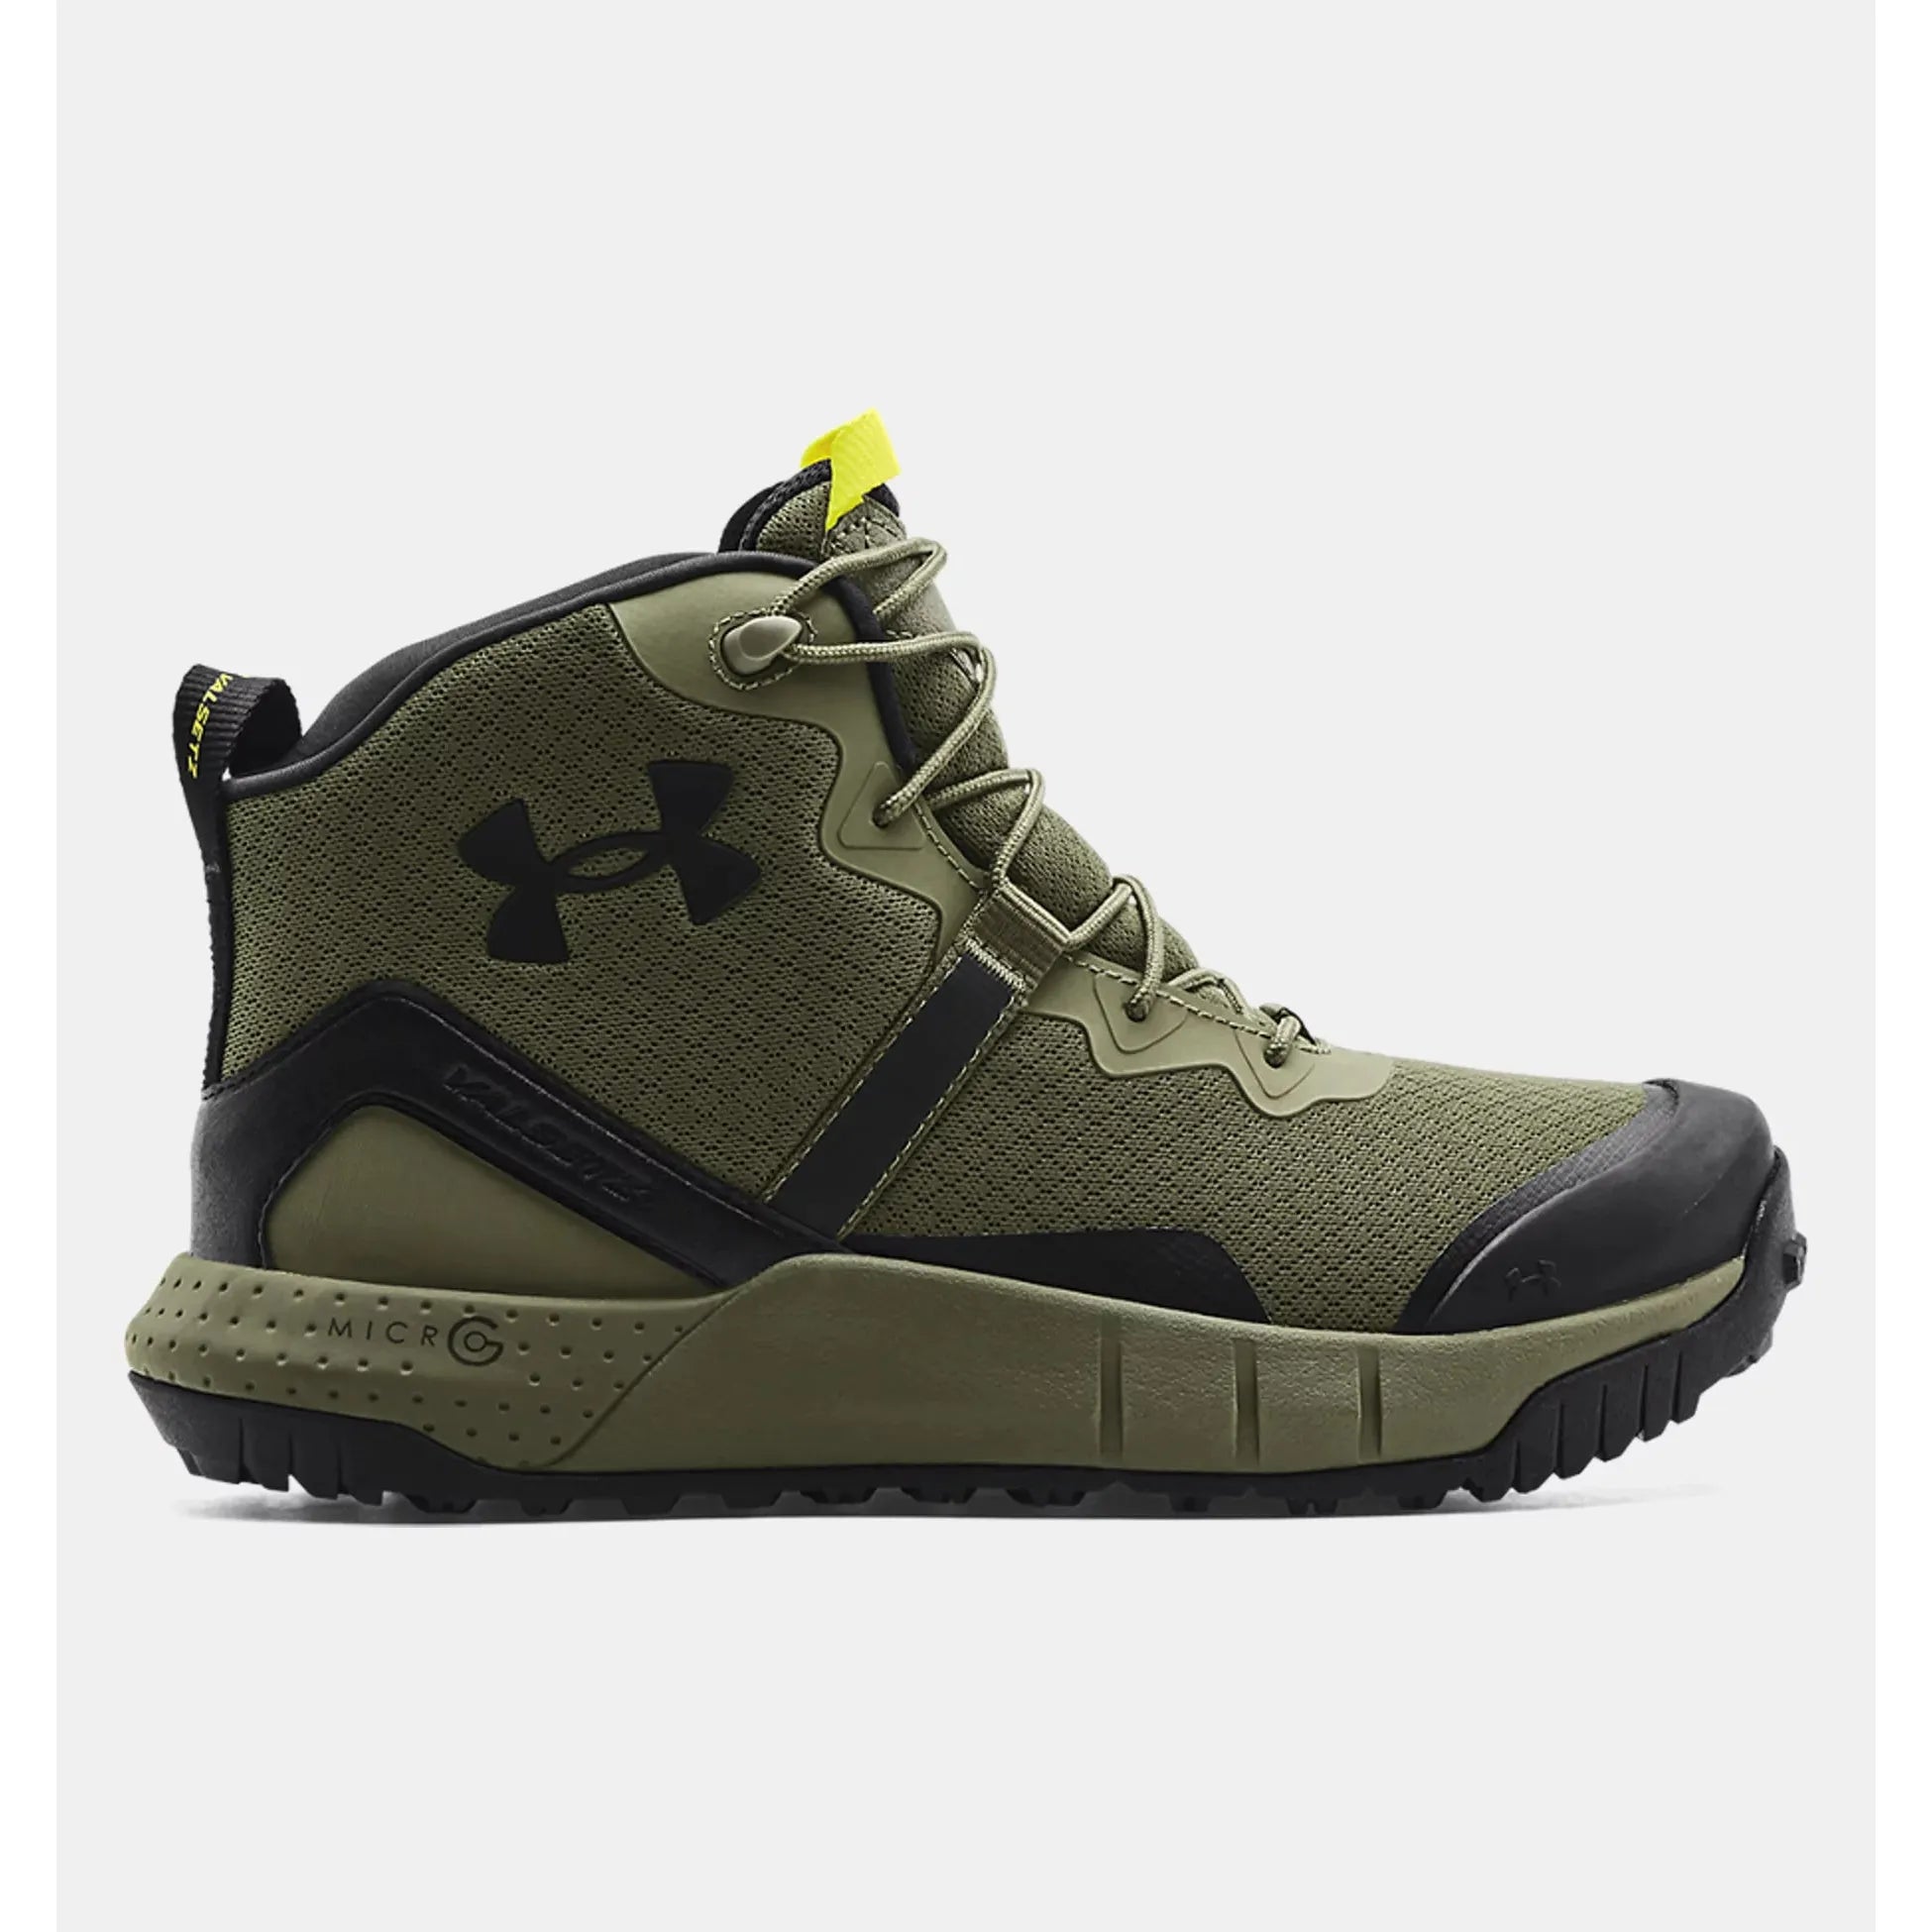 Under Armour Women's Micro G Valsetz Military and Tactical Boot